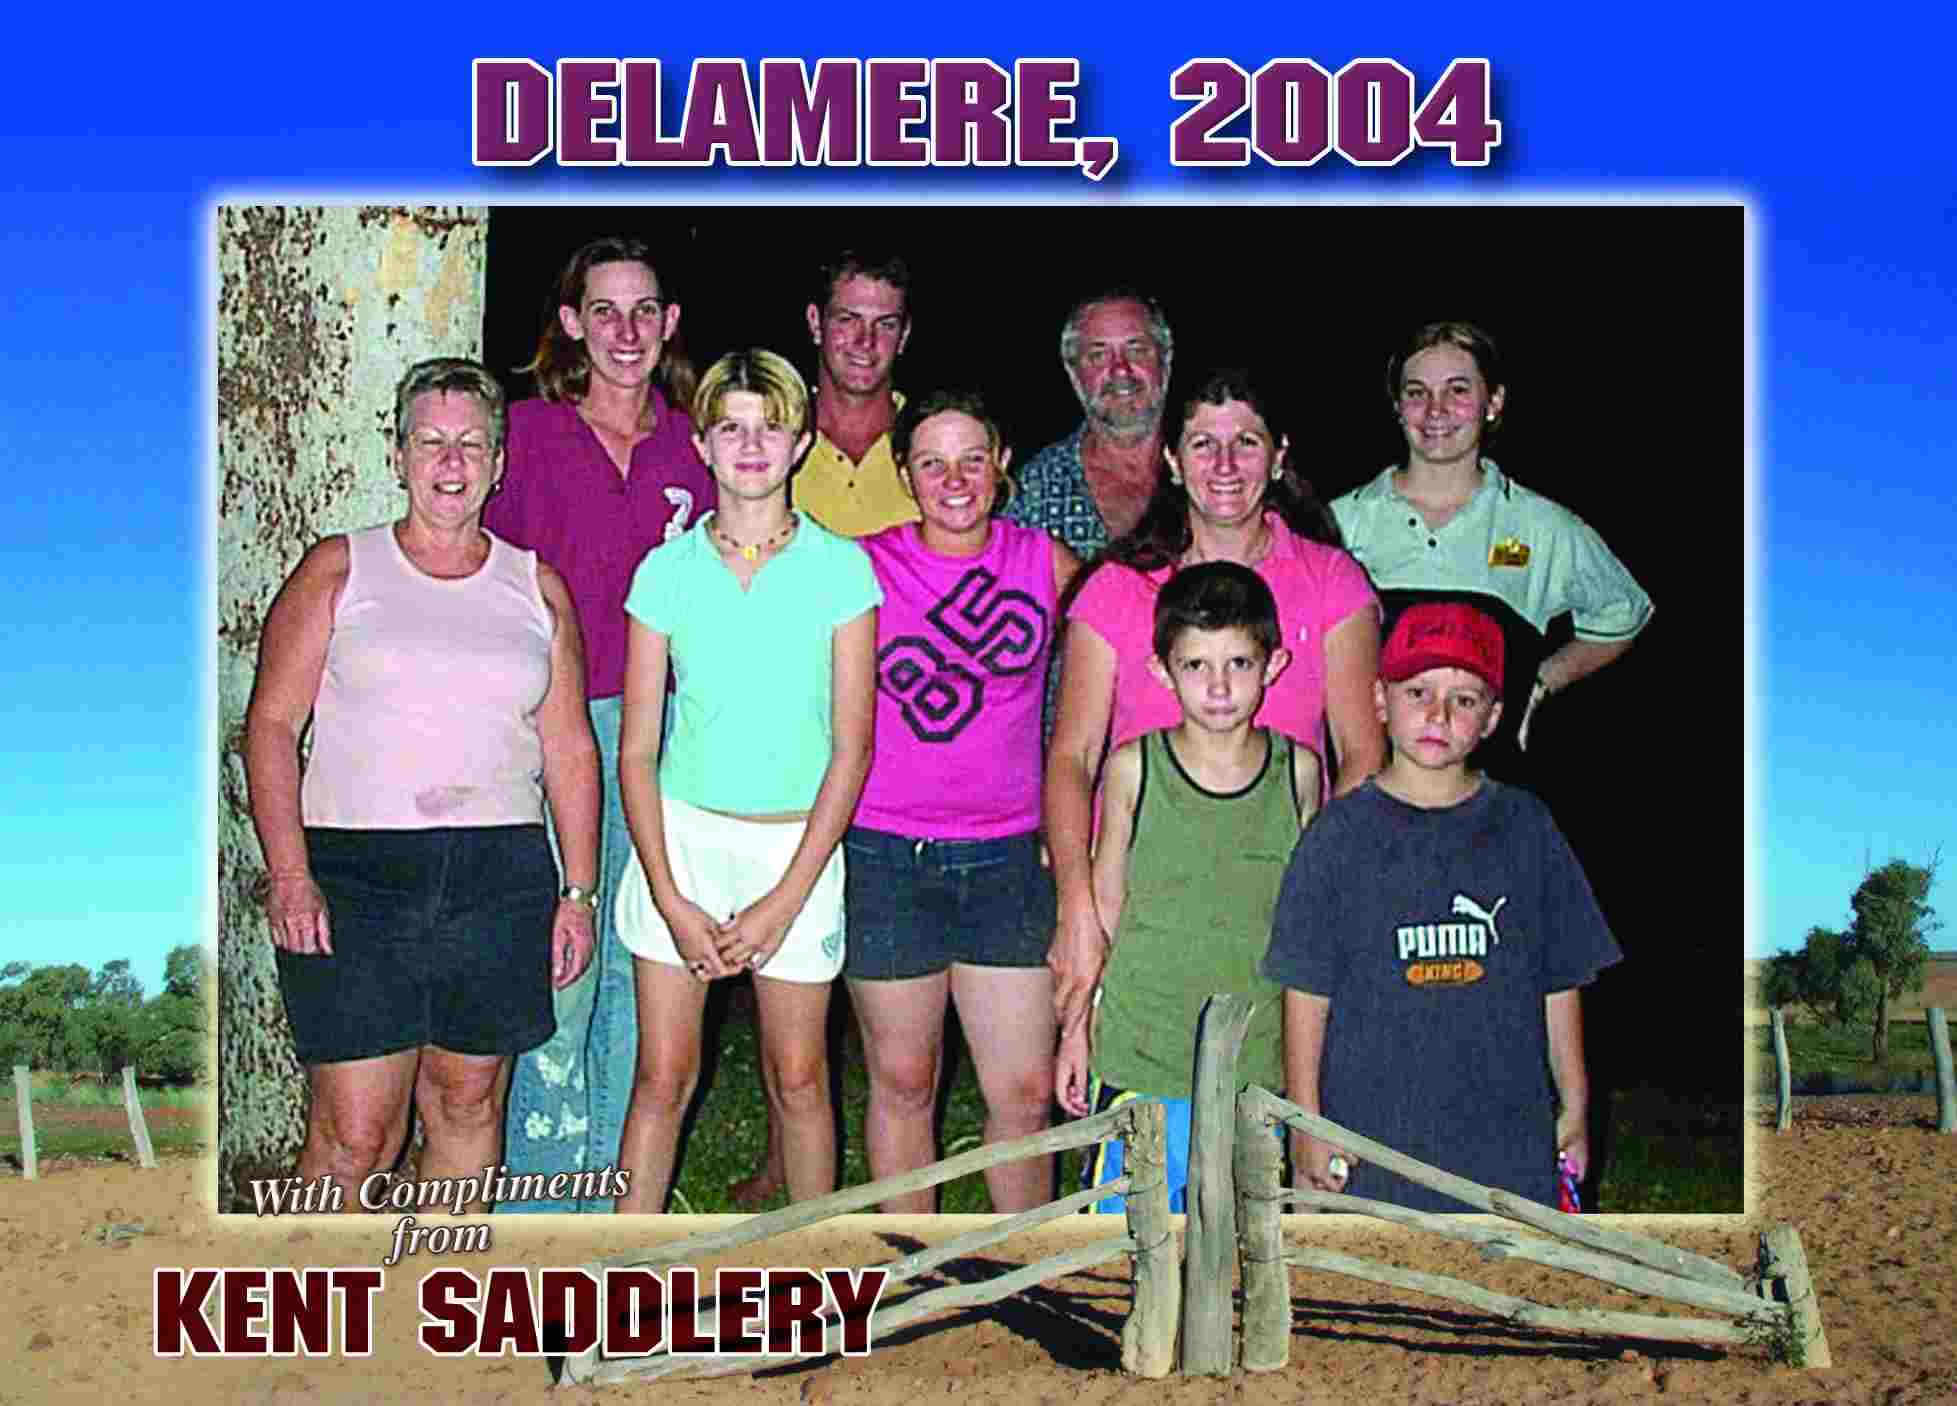 Northern Territory - Delamere 31